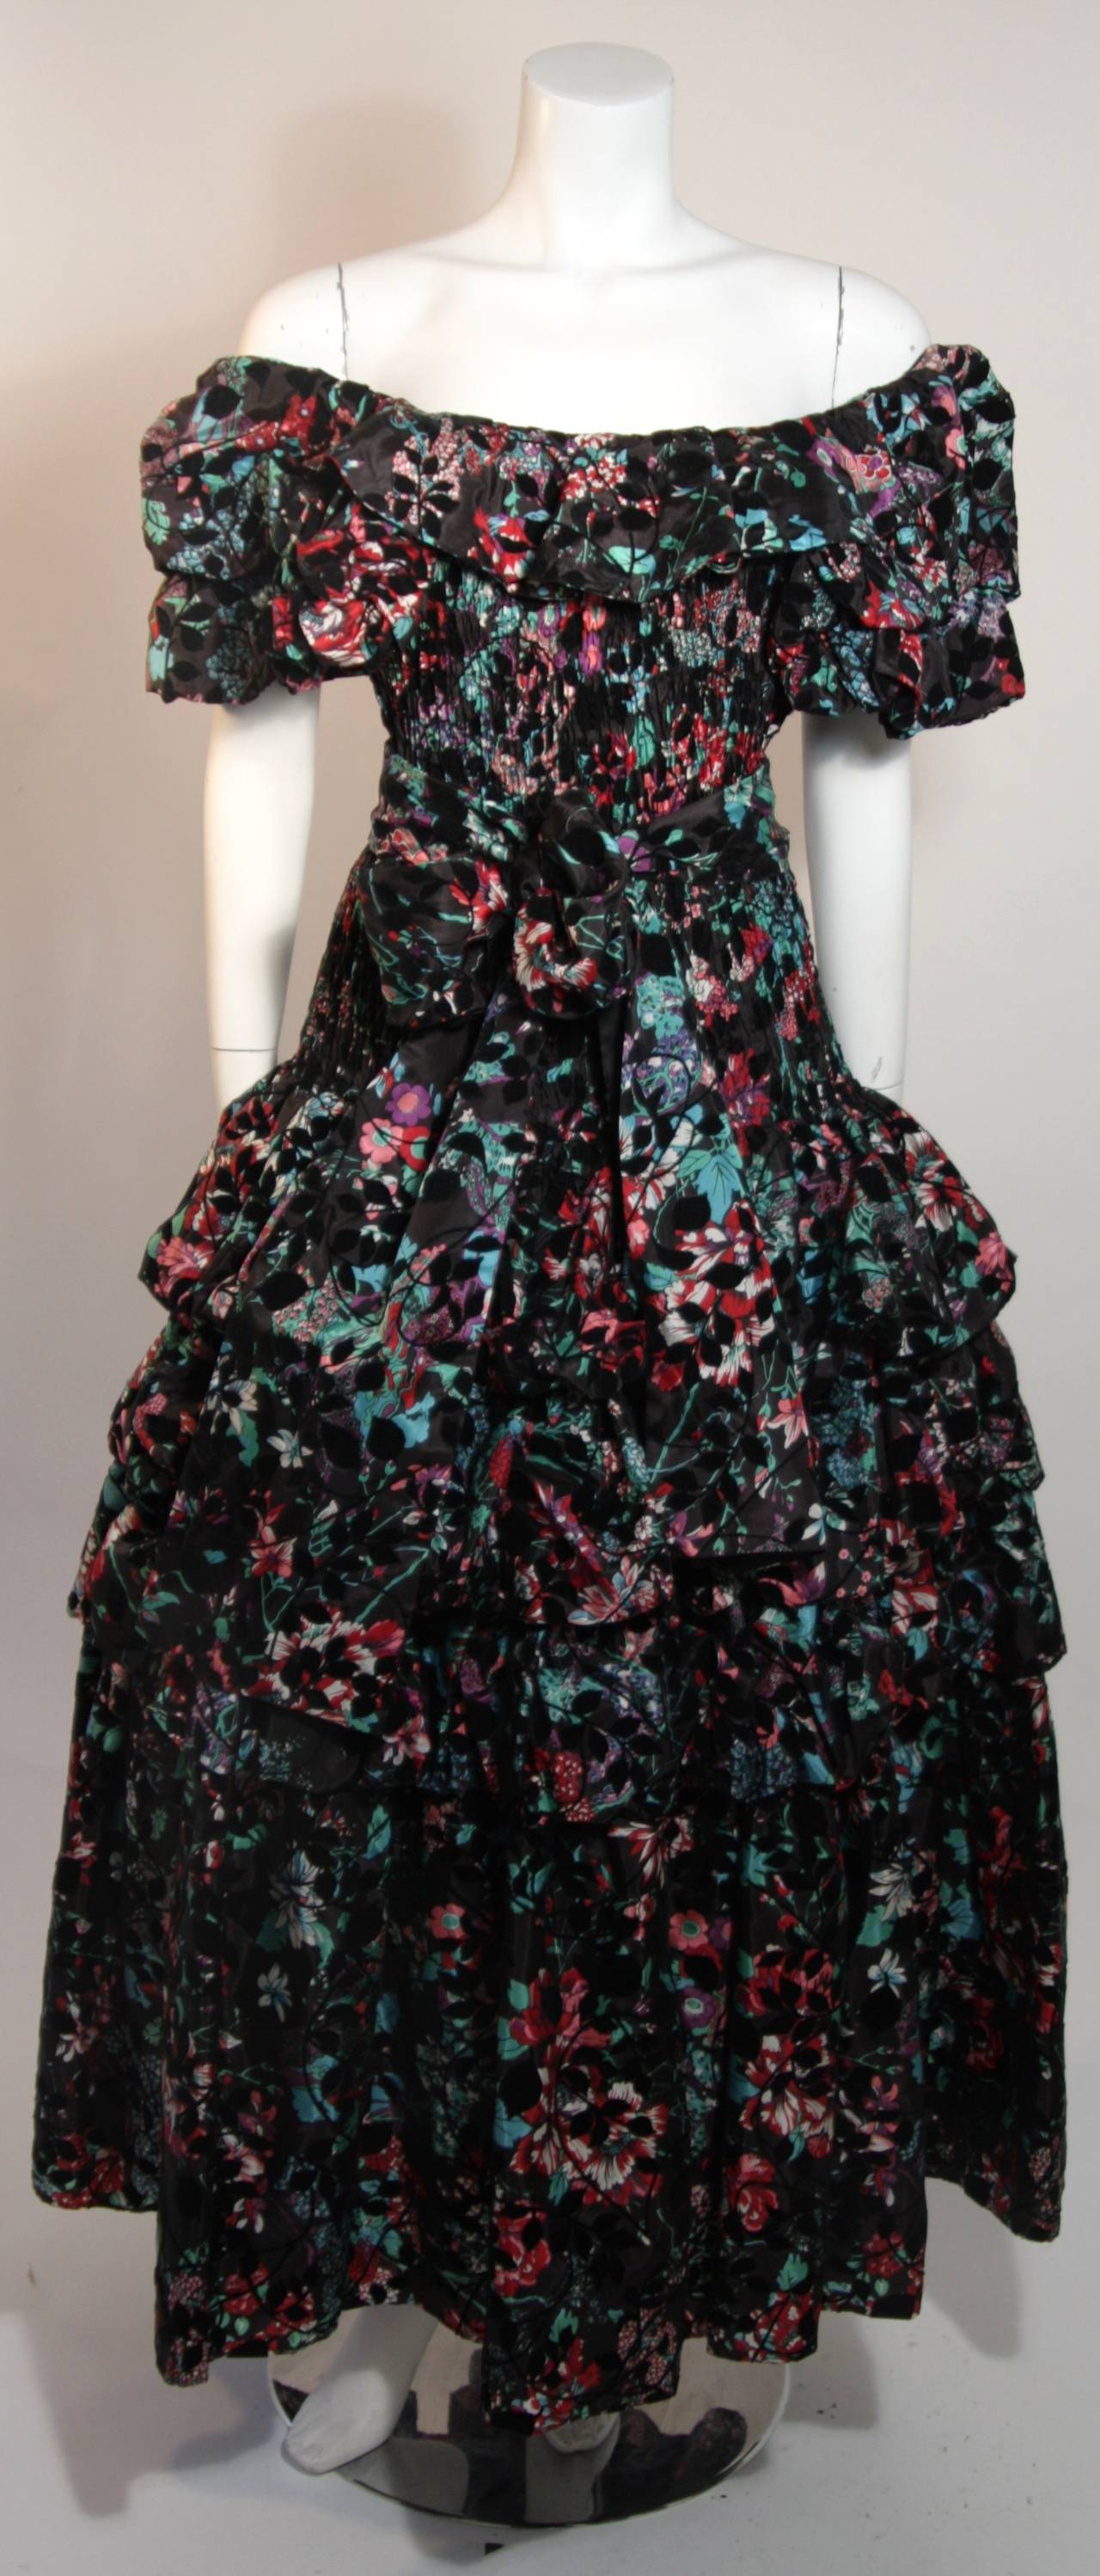 This wonderful Diane Fres design is available for viewing at our Beverly Hills Boutique. The gown is composed of a vibrant textile featuring velvet accents. The smocked bodice is accentuated by a ruffled and tiered skirt. The dress is pull on style